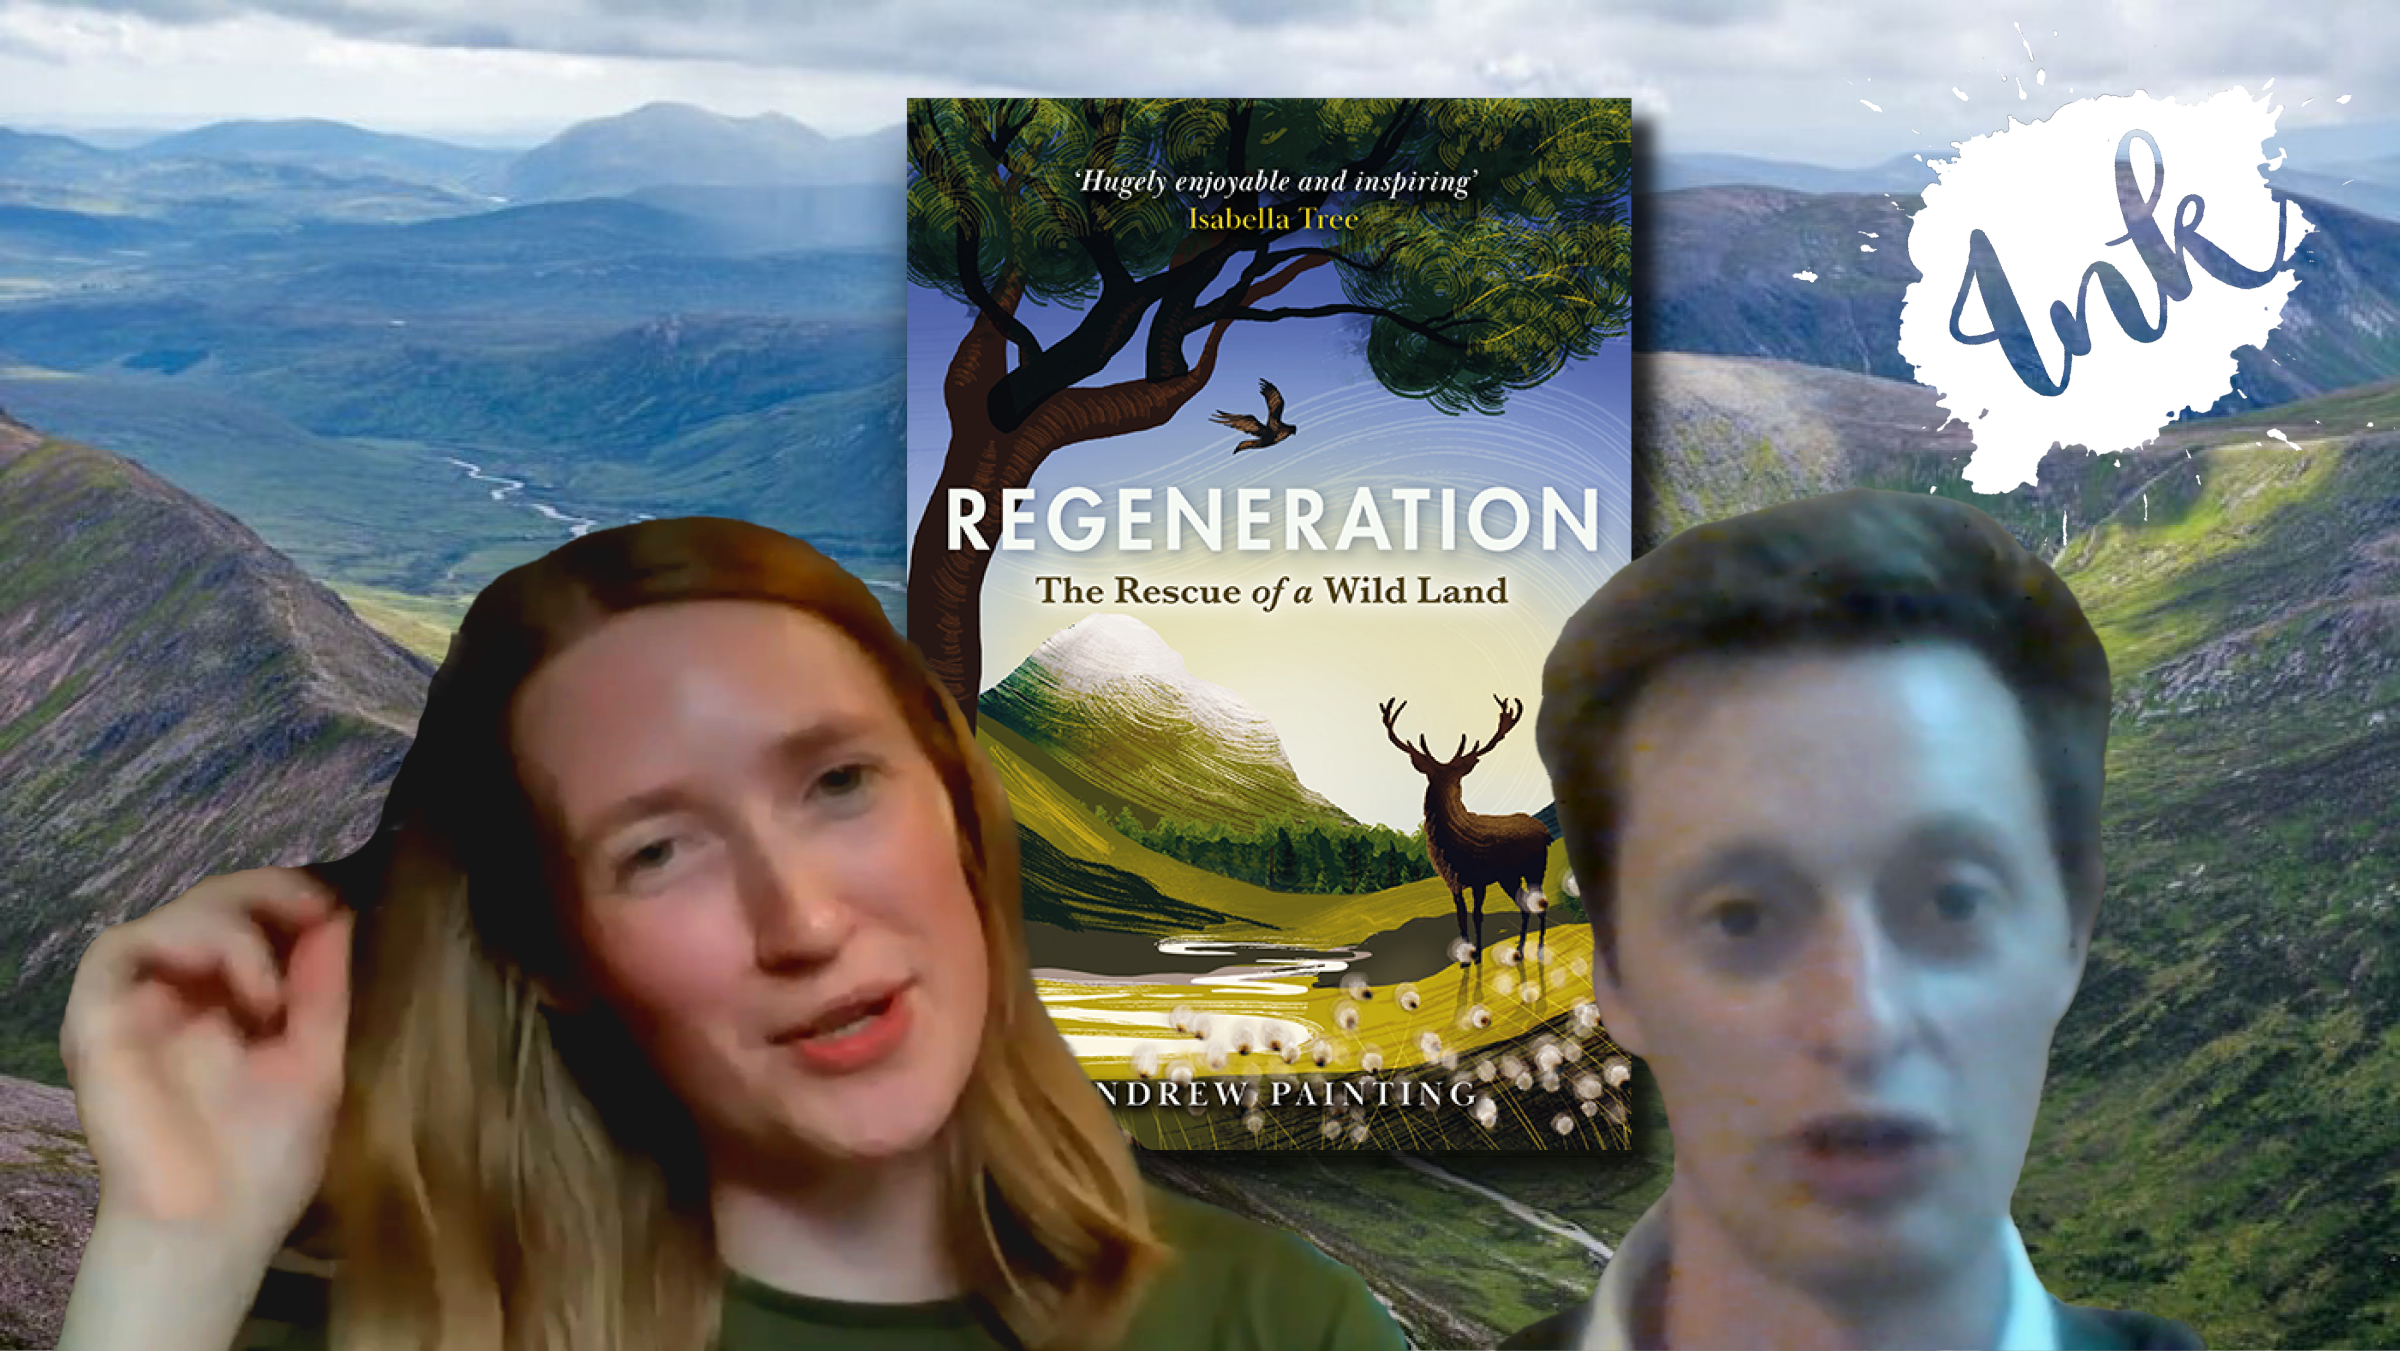 Regeneration live with Andrew Painting and Molly Doubleday